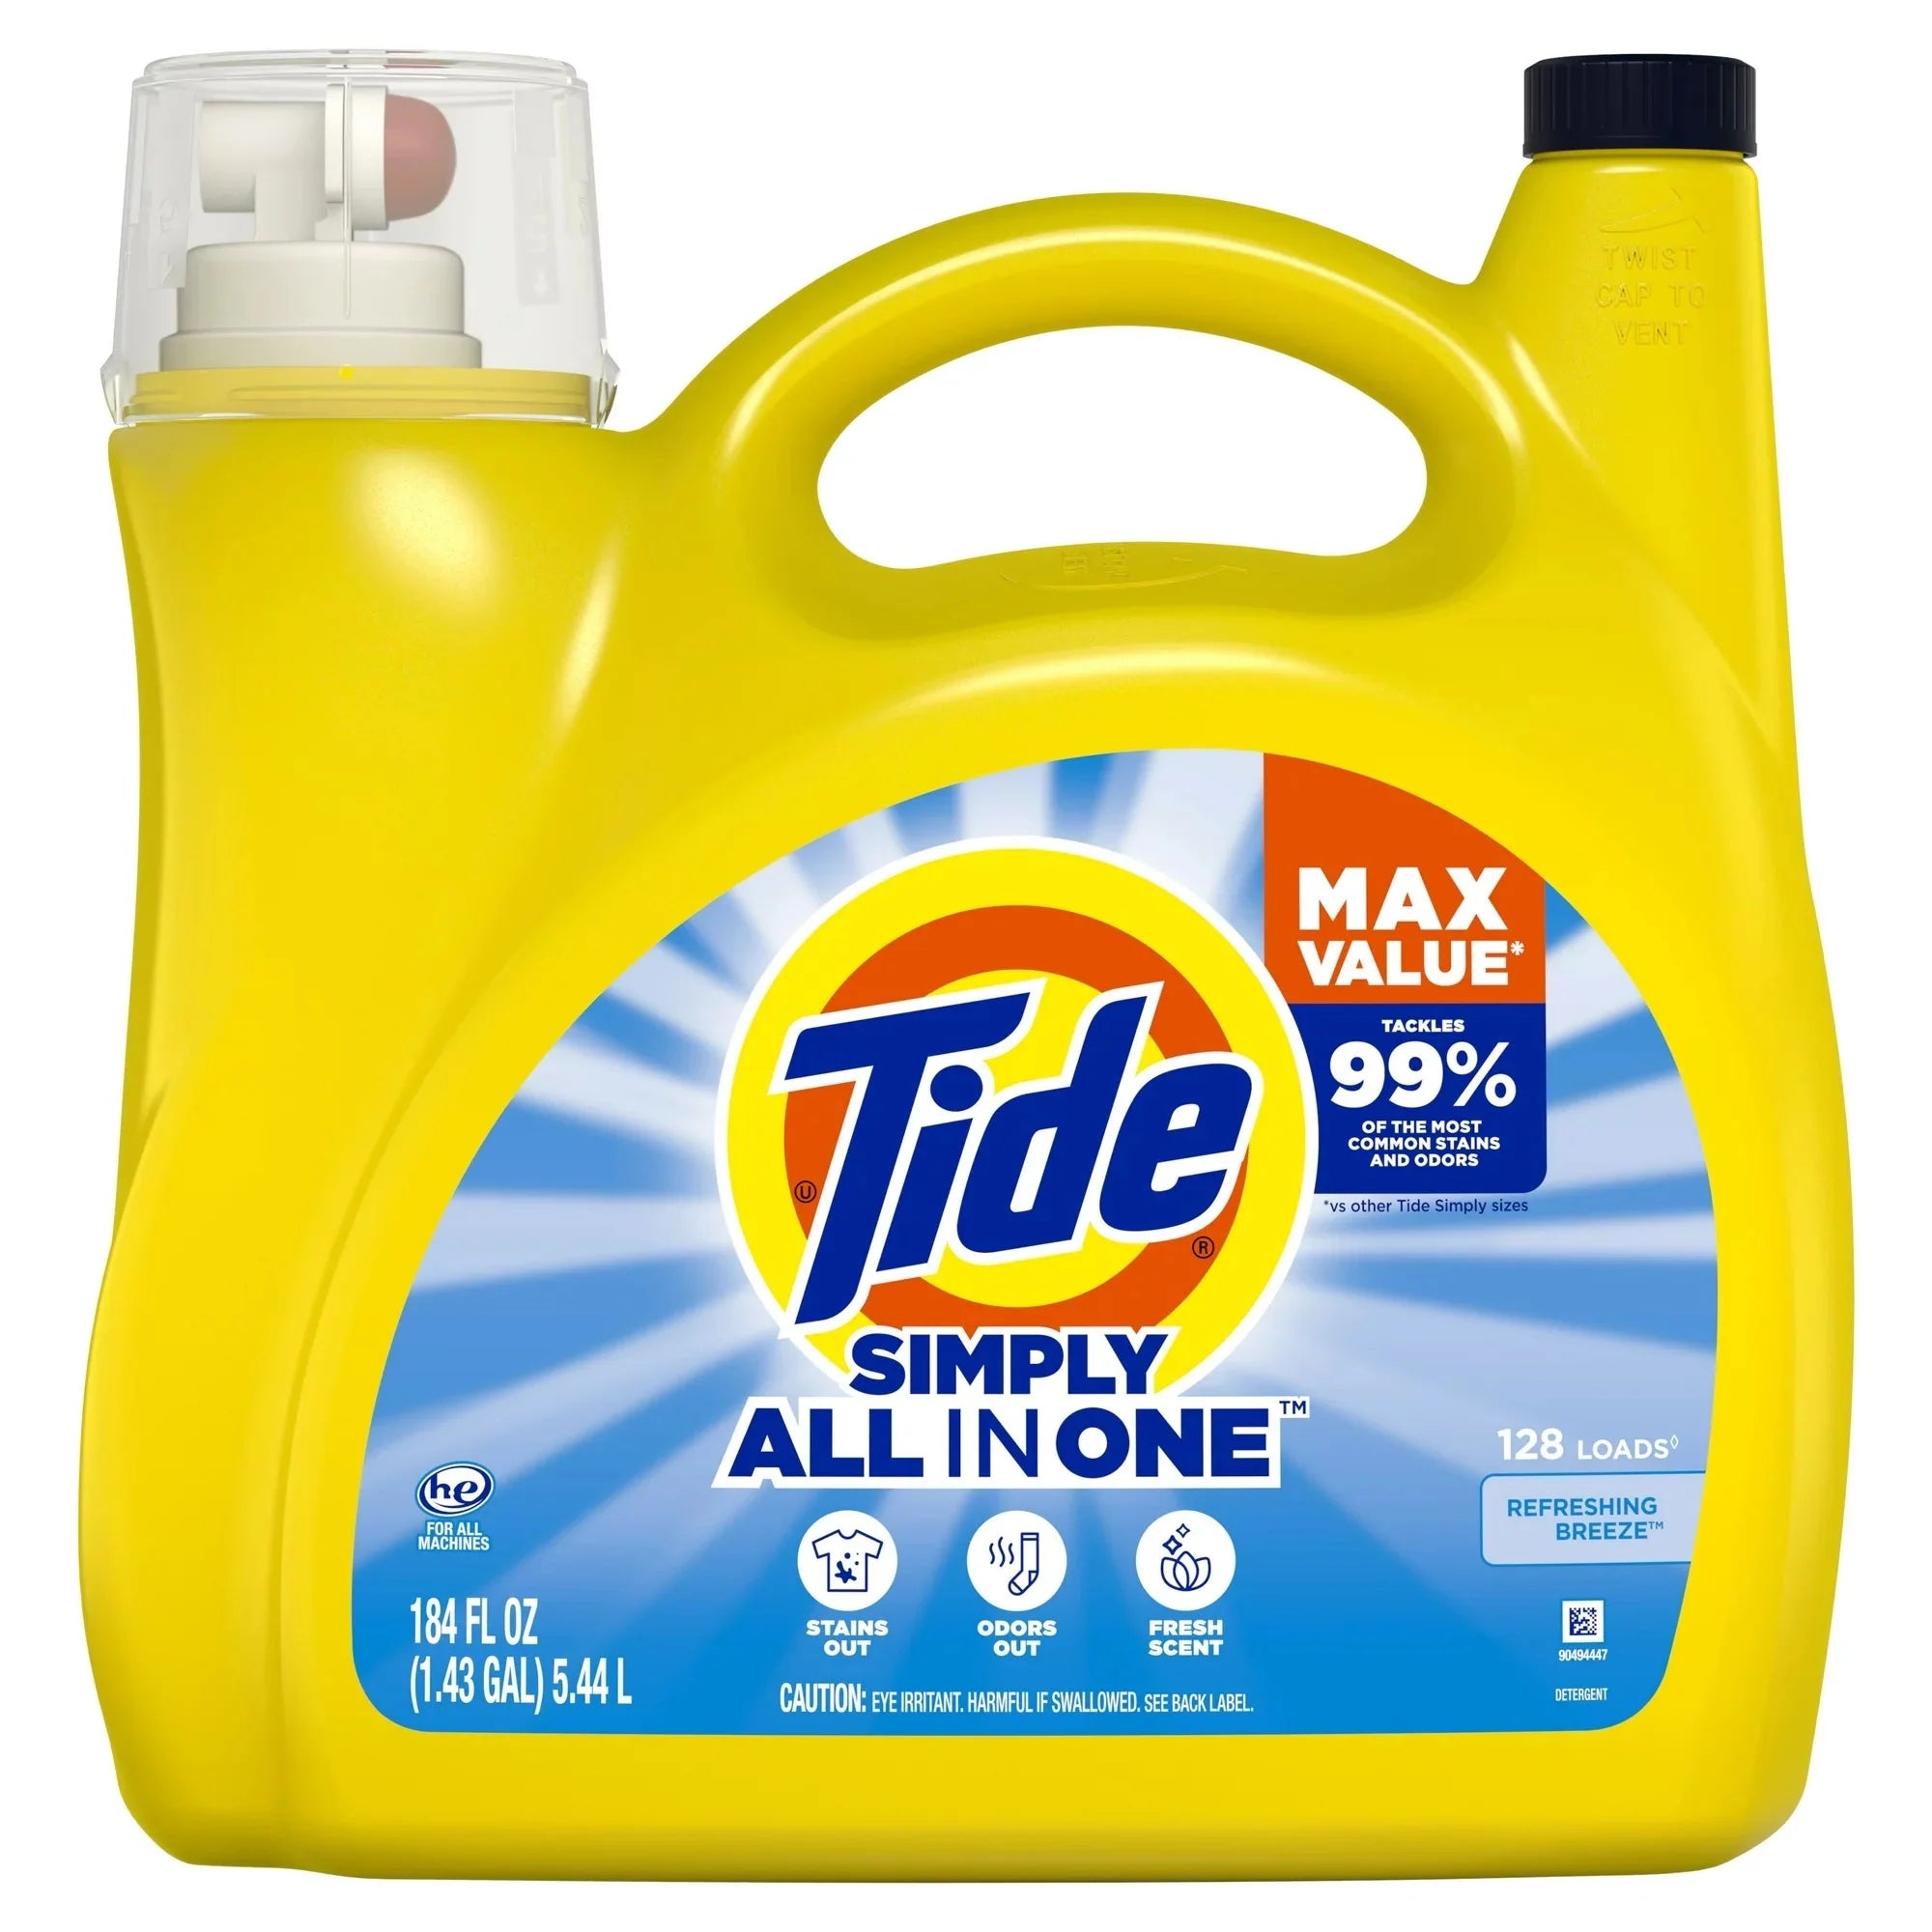 Wholesale prices with free shipping all over United States Tide Simply Liquid Laundry Detergent, Refreshing Breeze, 184 fl oz - Steven Deals